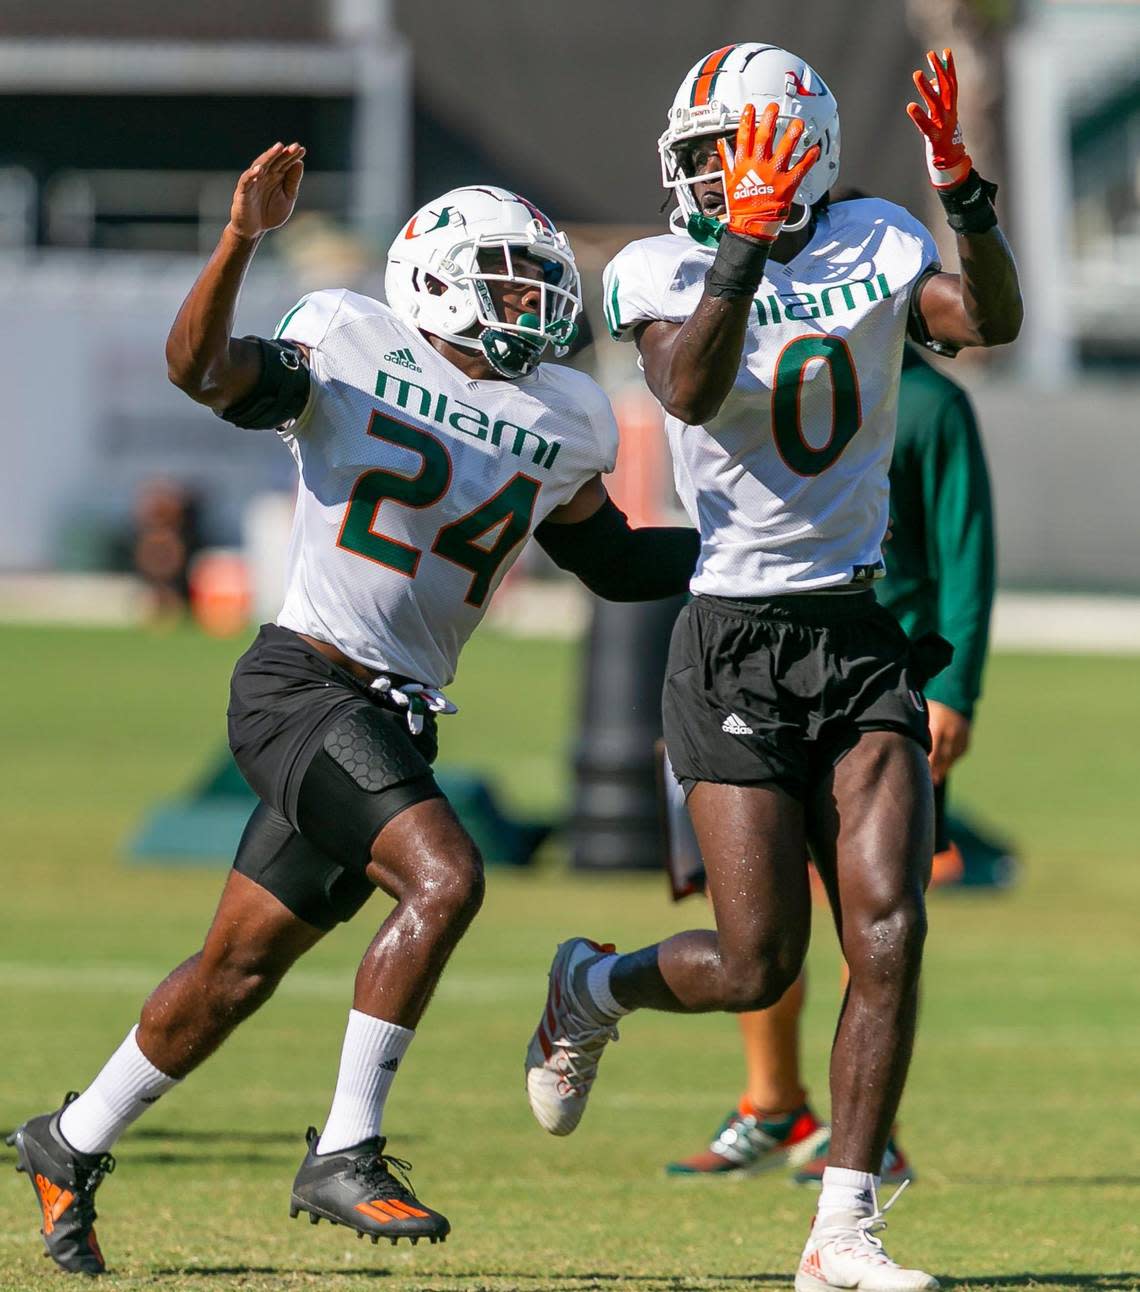 Miami Hurricanes defensive backs Kamren Kinchens (24) and James Williams (0) run drills at the University of Miami’s Greentree Practice Fields on Monday, Aug. 15, 2022, in Coral Gables, Fla.